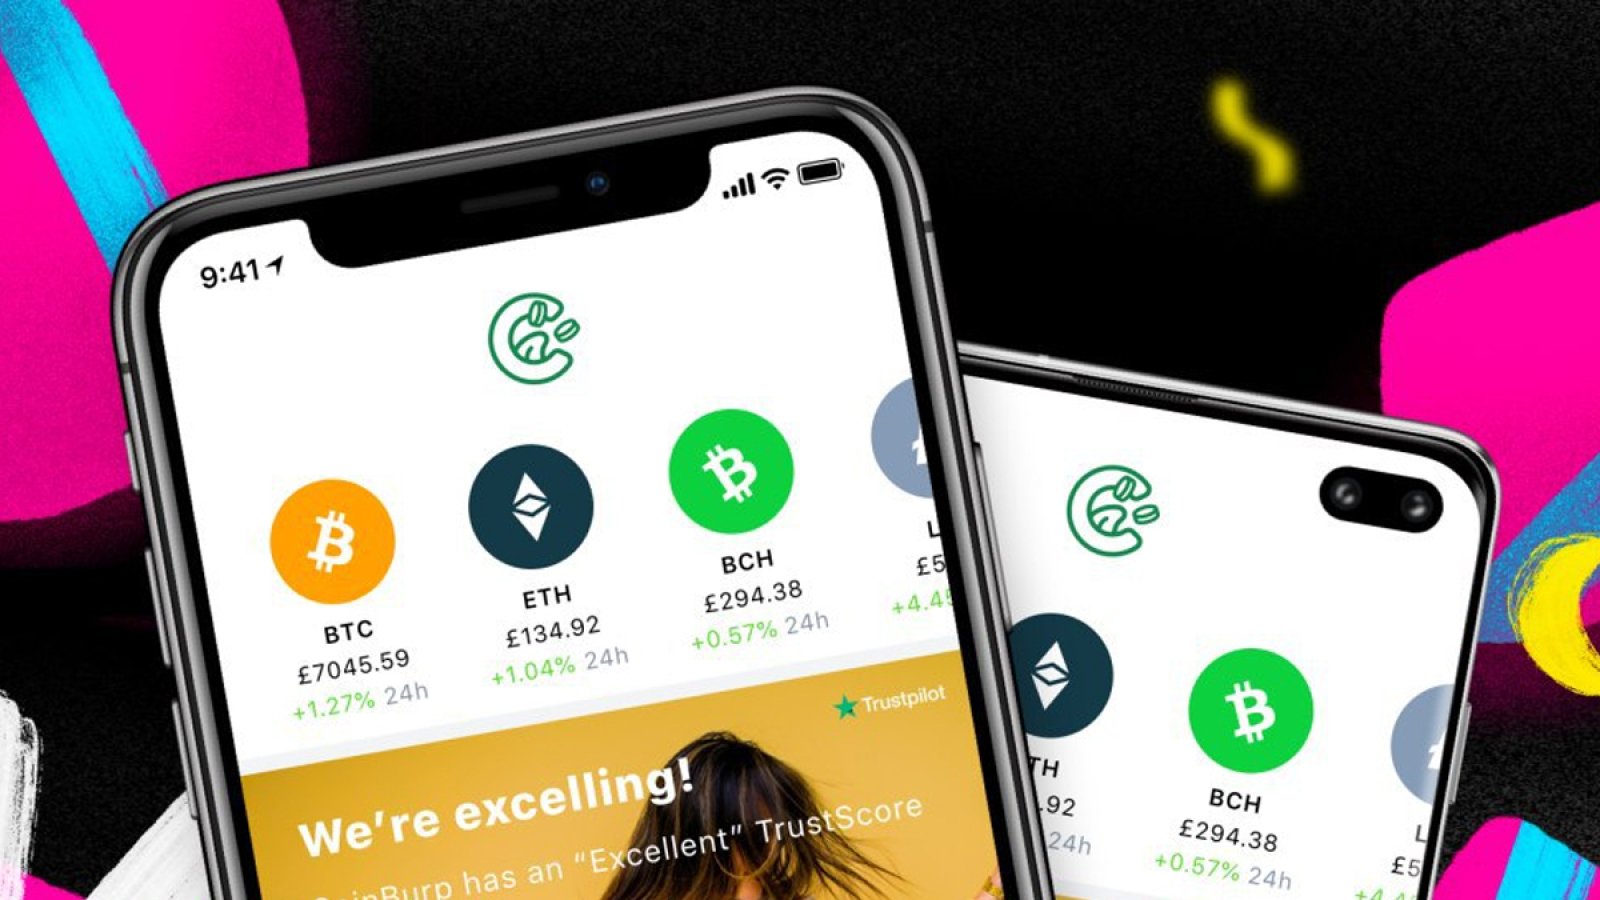 CoinBurp Launches New iOS and Android Cryptocurrency Trading Apps